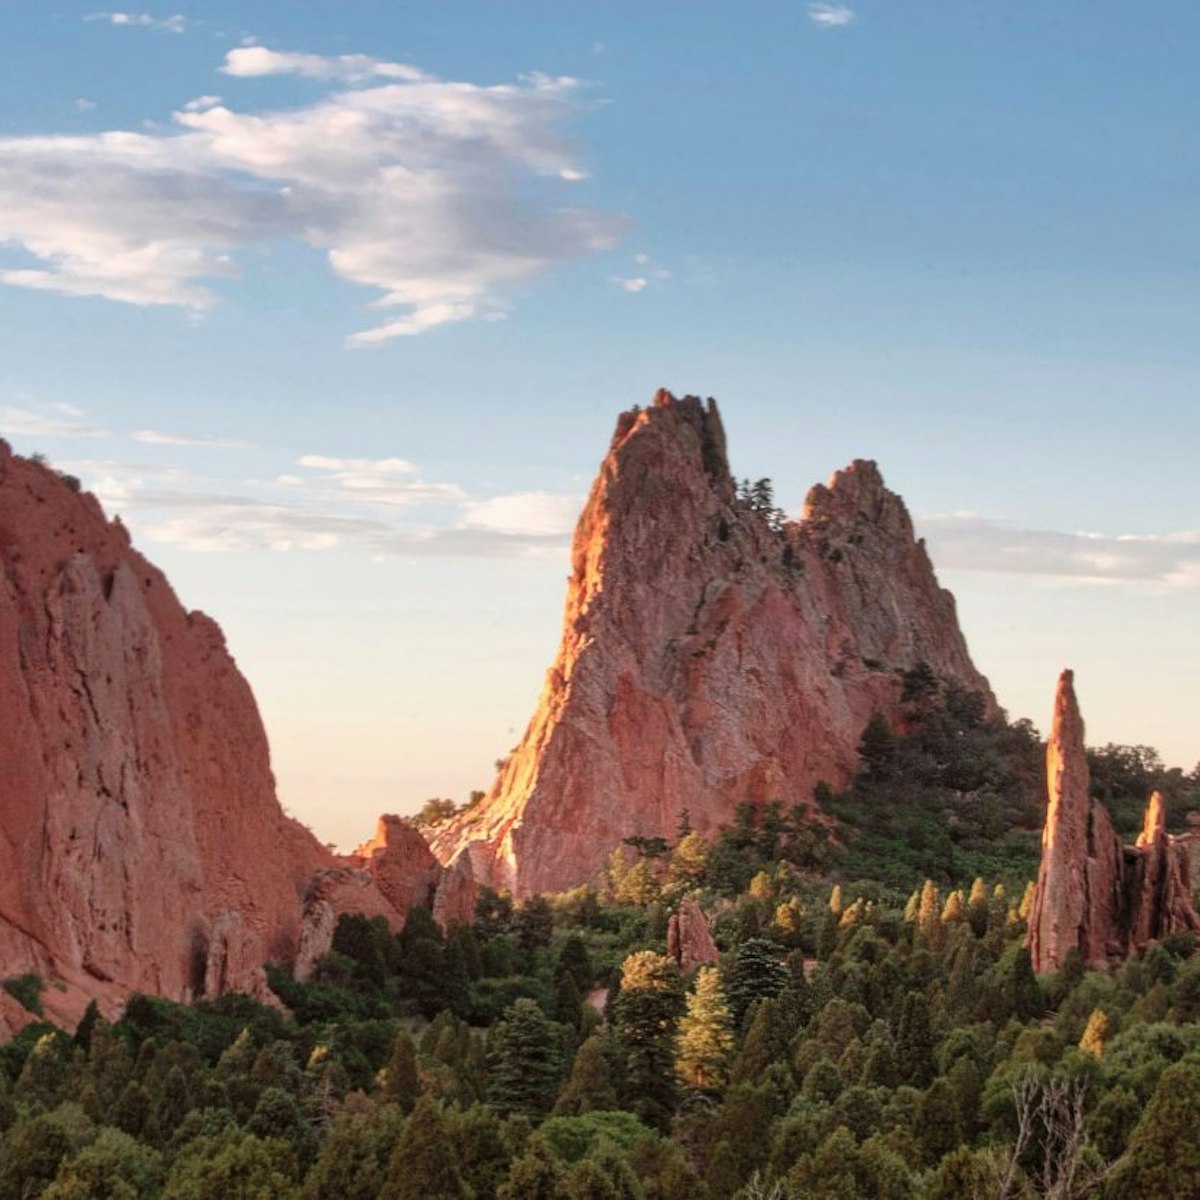 The famous giant red sandstone formations at Garden of the Gods in Colorado Springs, Colorado